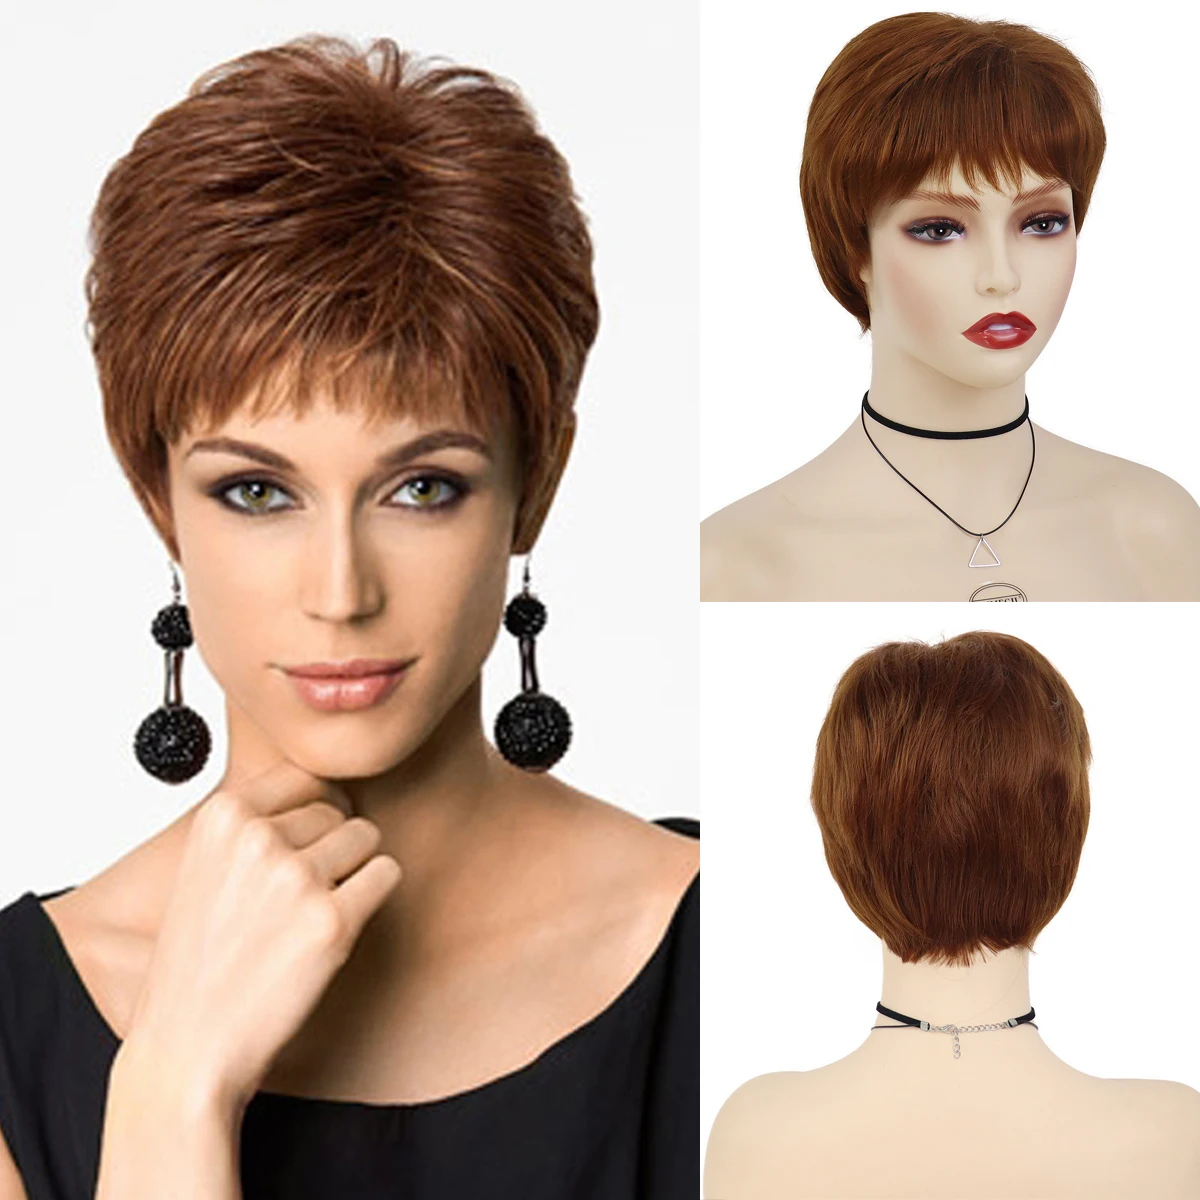 

GNIMEGIL Women Wig Short Brown Synthetic Hair Wig Bob Haircut Natural Wigs for Mother Old Lady Costume Elderly Wigs Straight Cut